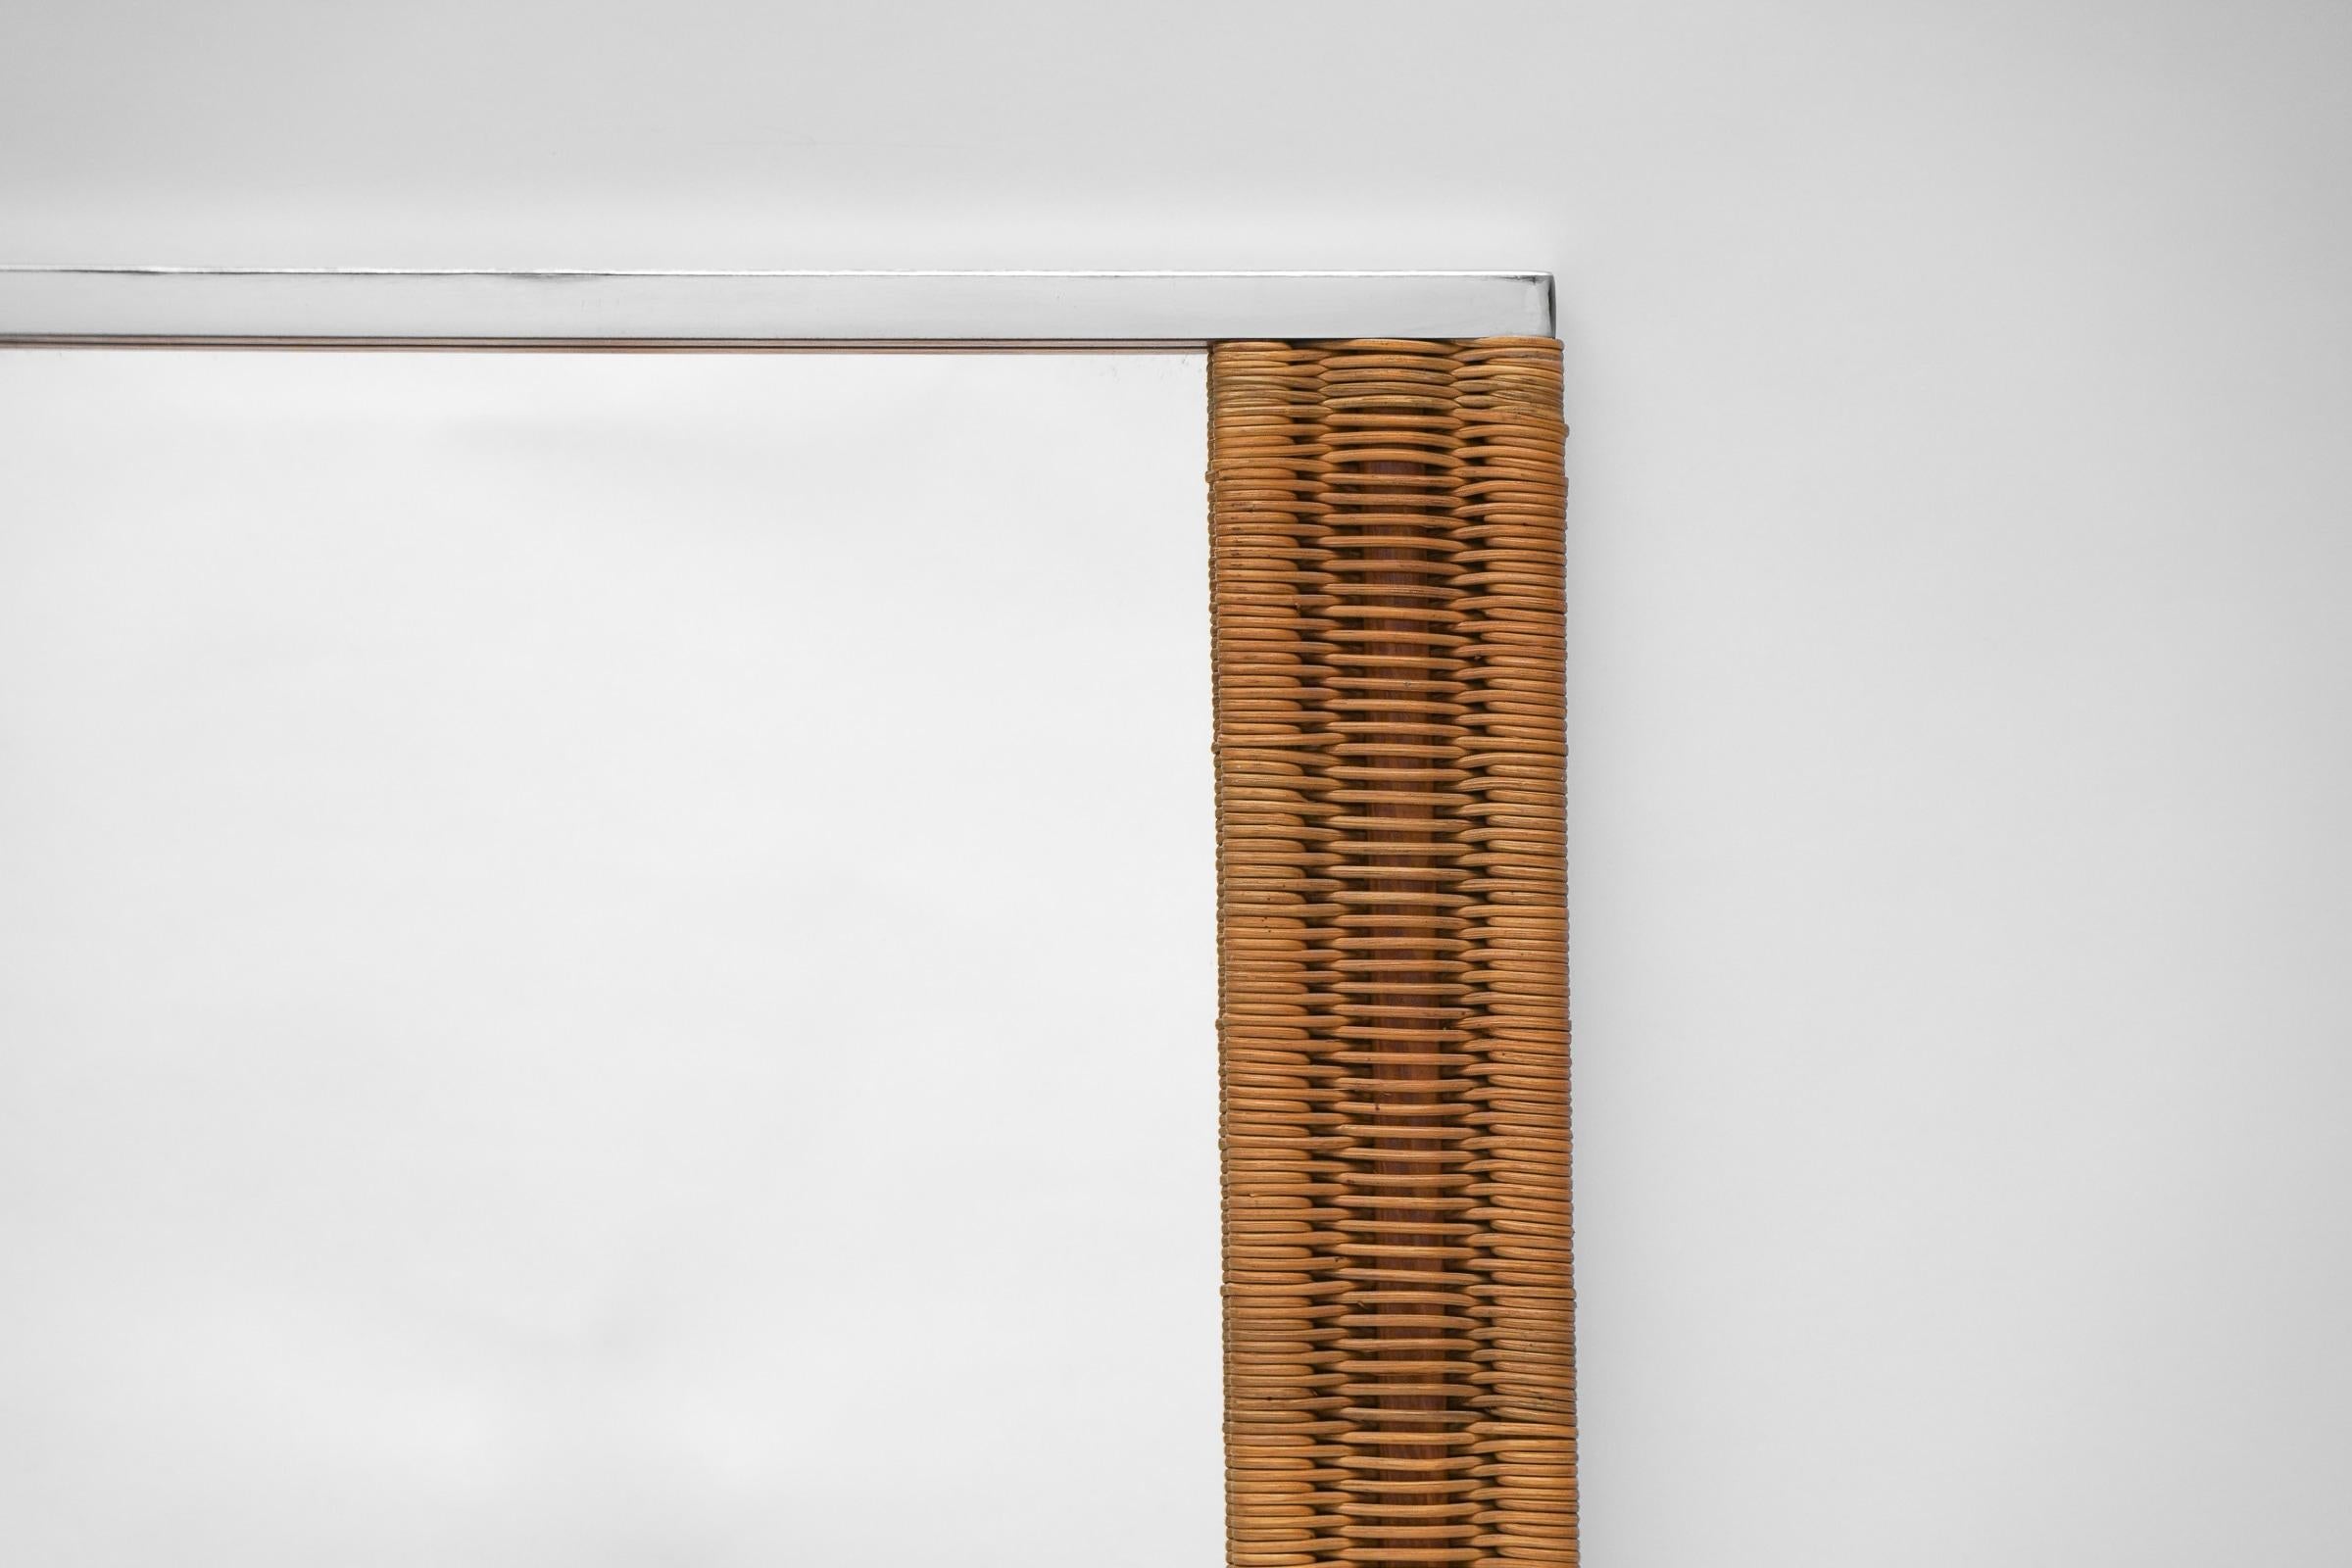 Italian Lovely Large Rattan and Chrome Wall Mirror in Gebriella Crespi Style, 1960s For Sale